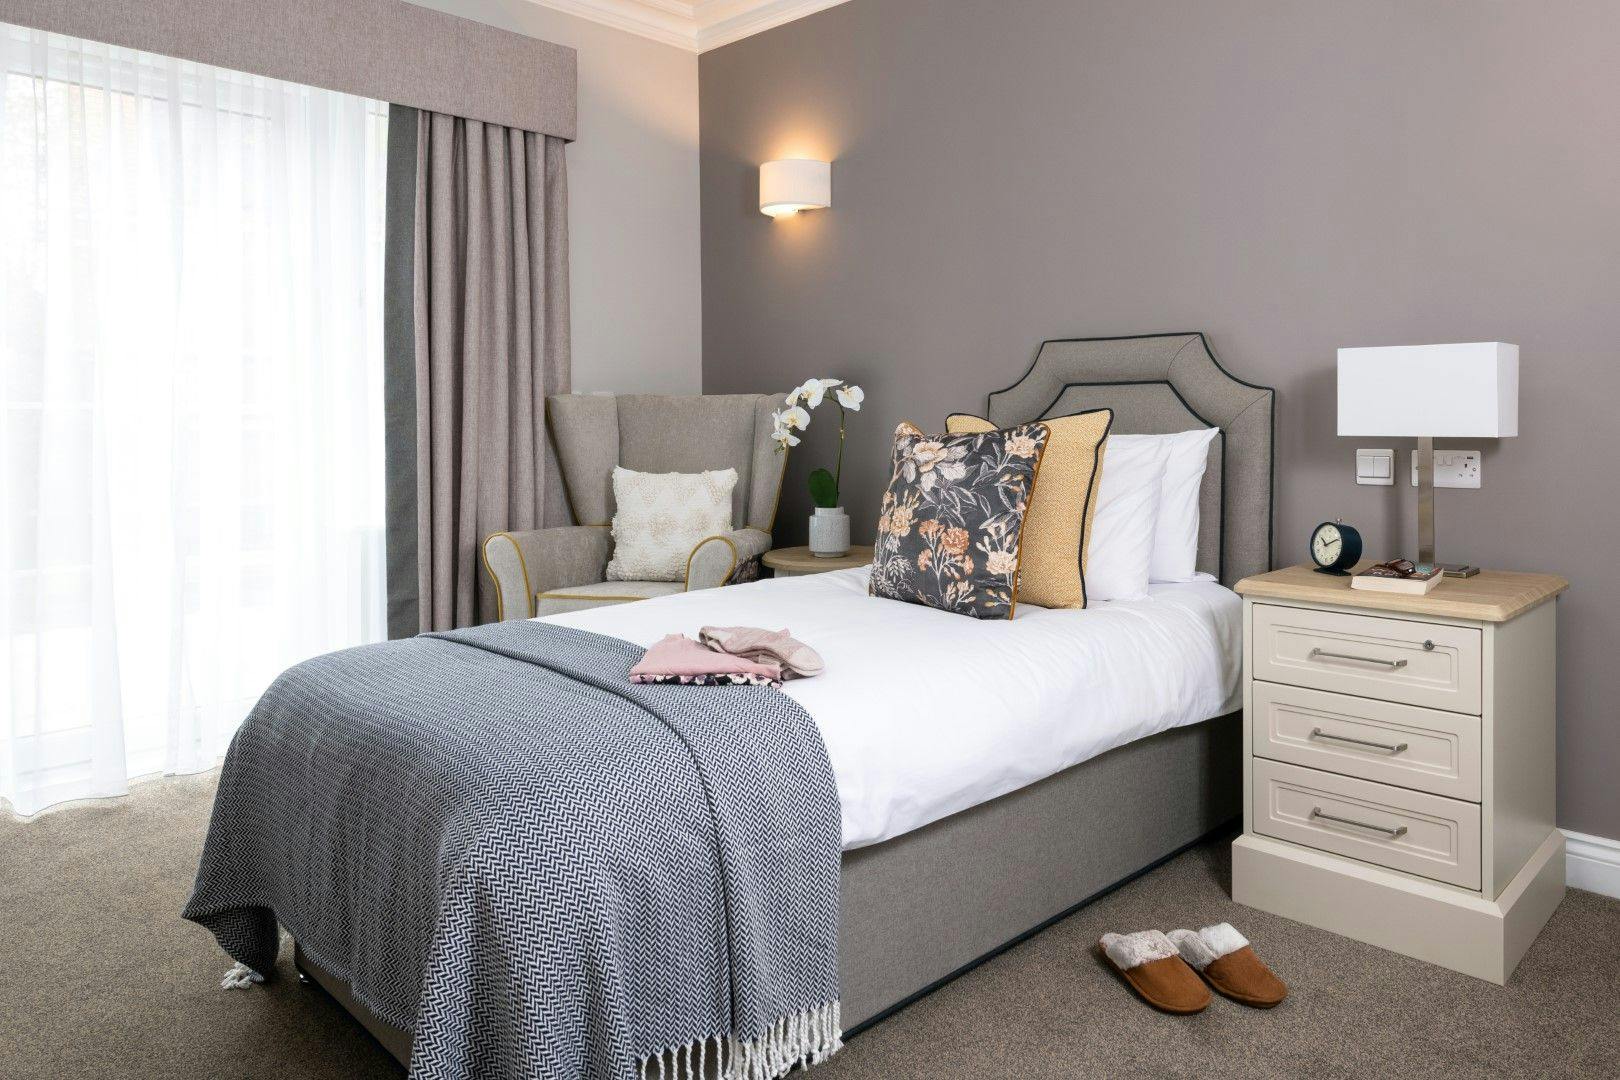 Bedroom at Angmering Grange Care Home in Littlehampton, West Sussex